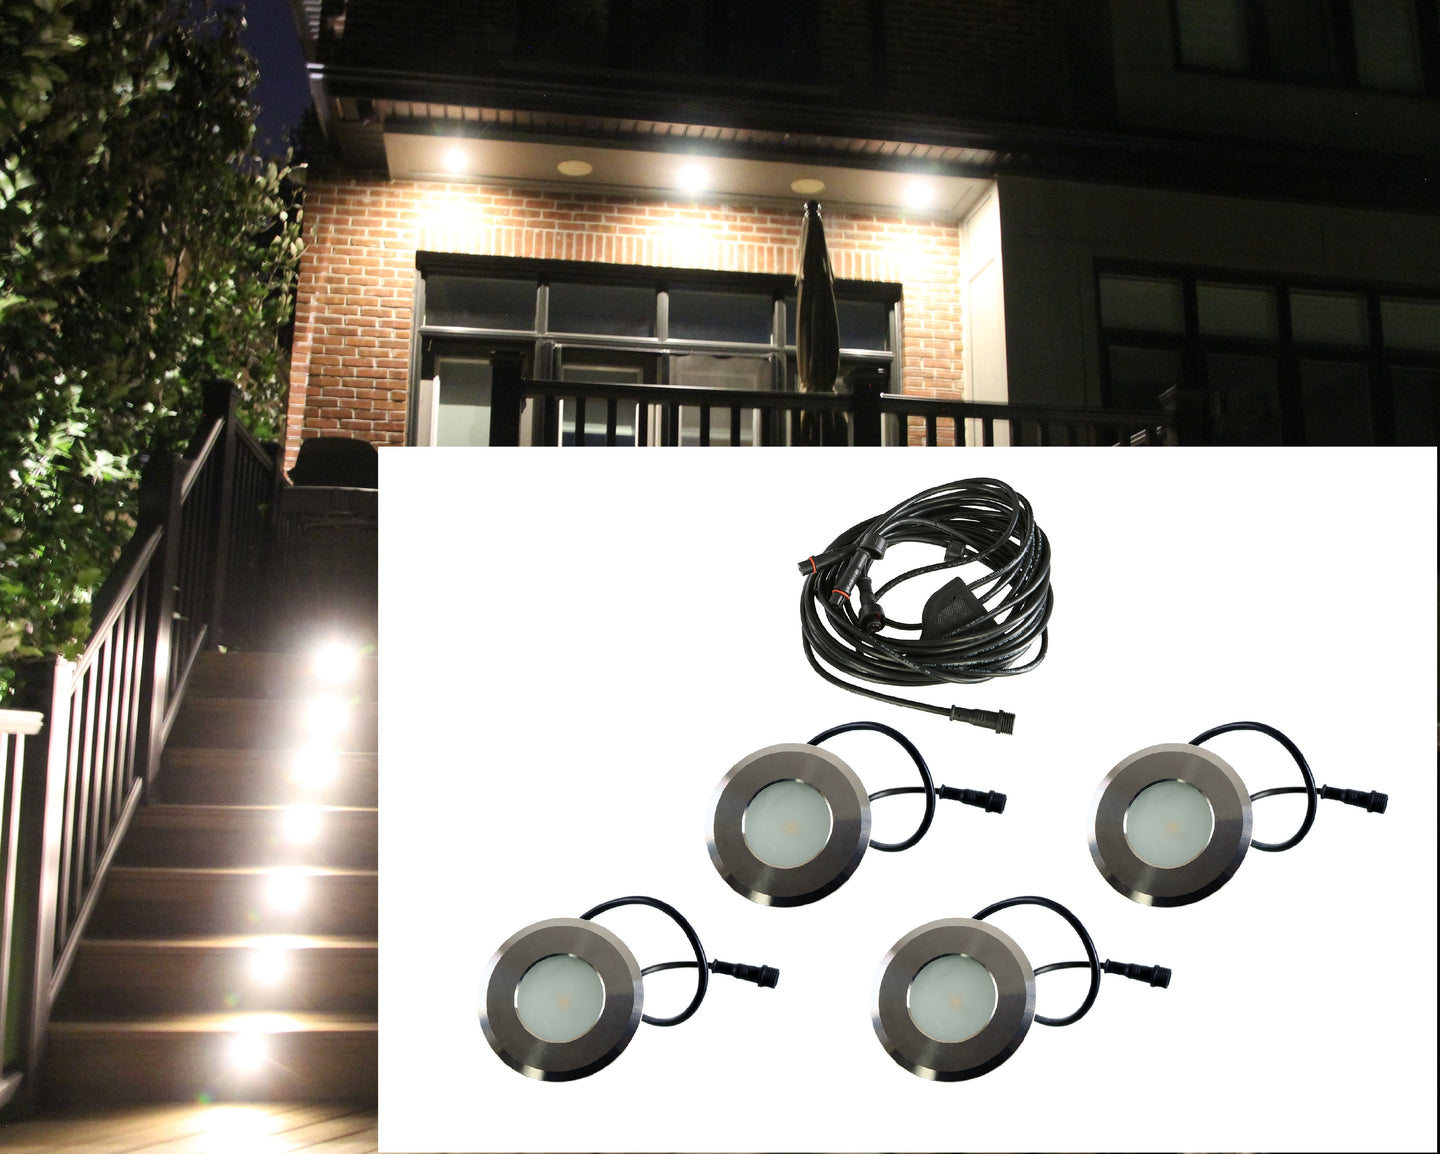 Inground LED Outdoor Recessed Lights KIT -  4 Recessed Lights 1 Watt with Daisy Chain #EZIL9KIT-BRUSHED NICKEL